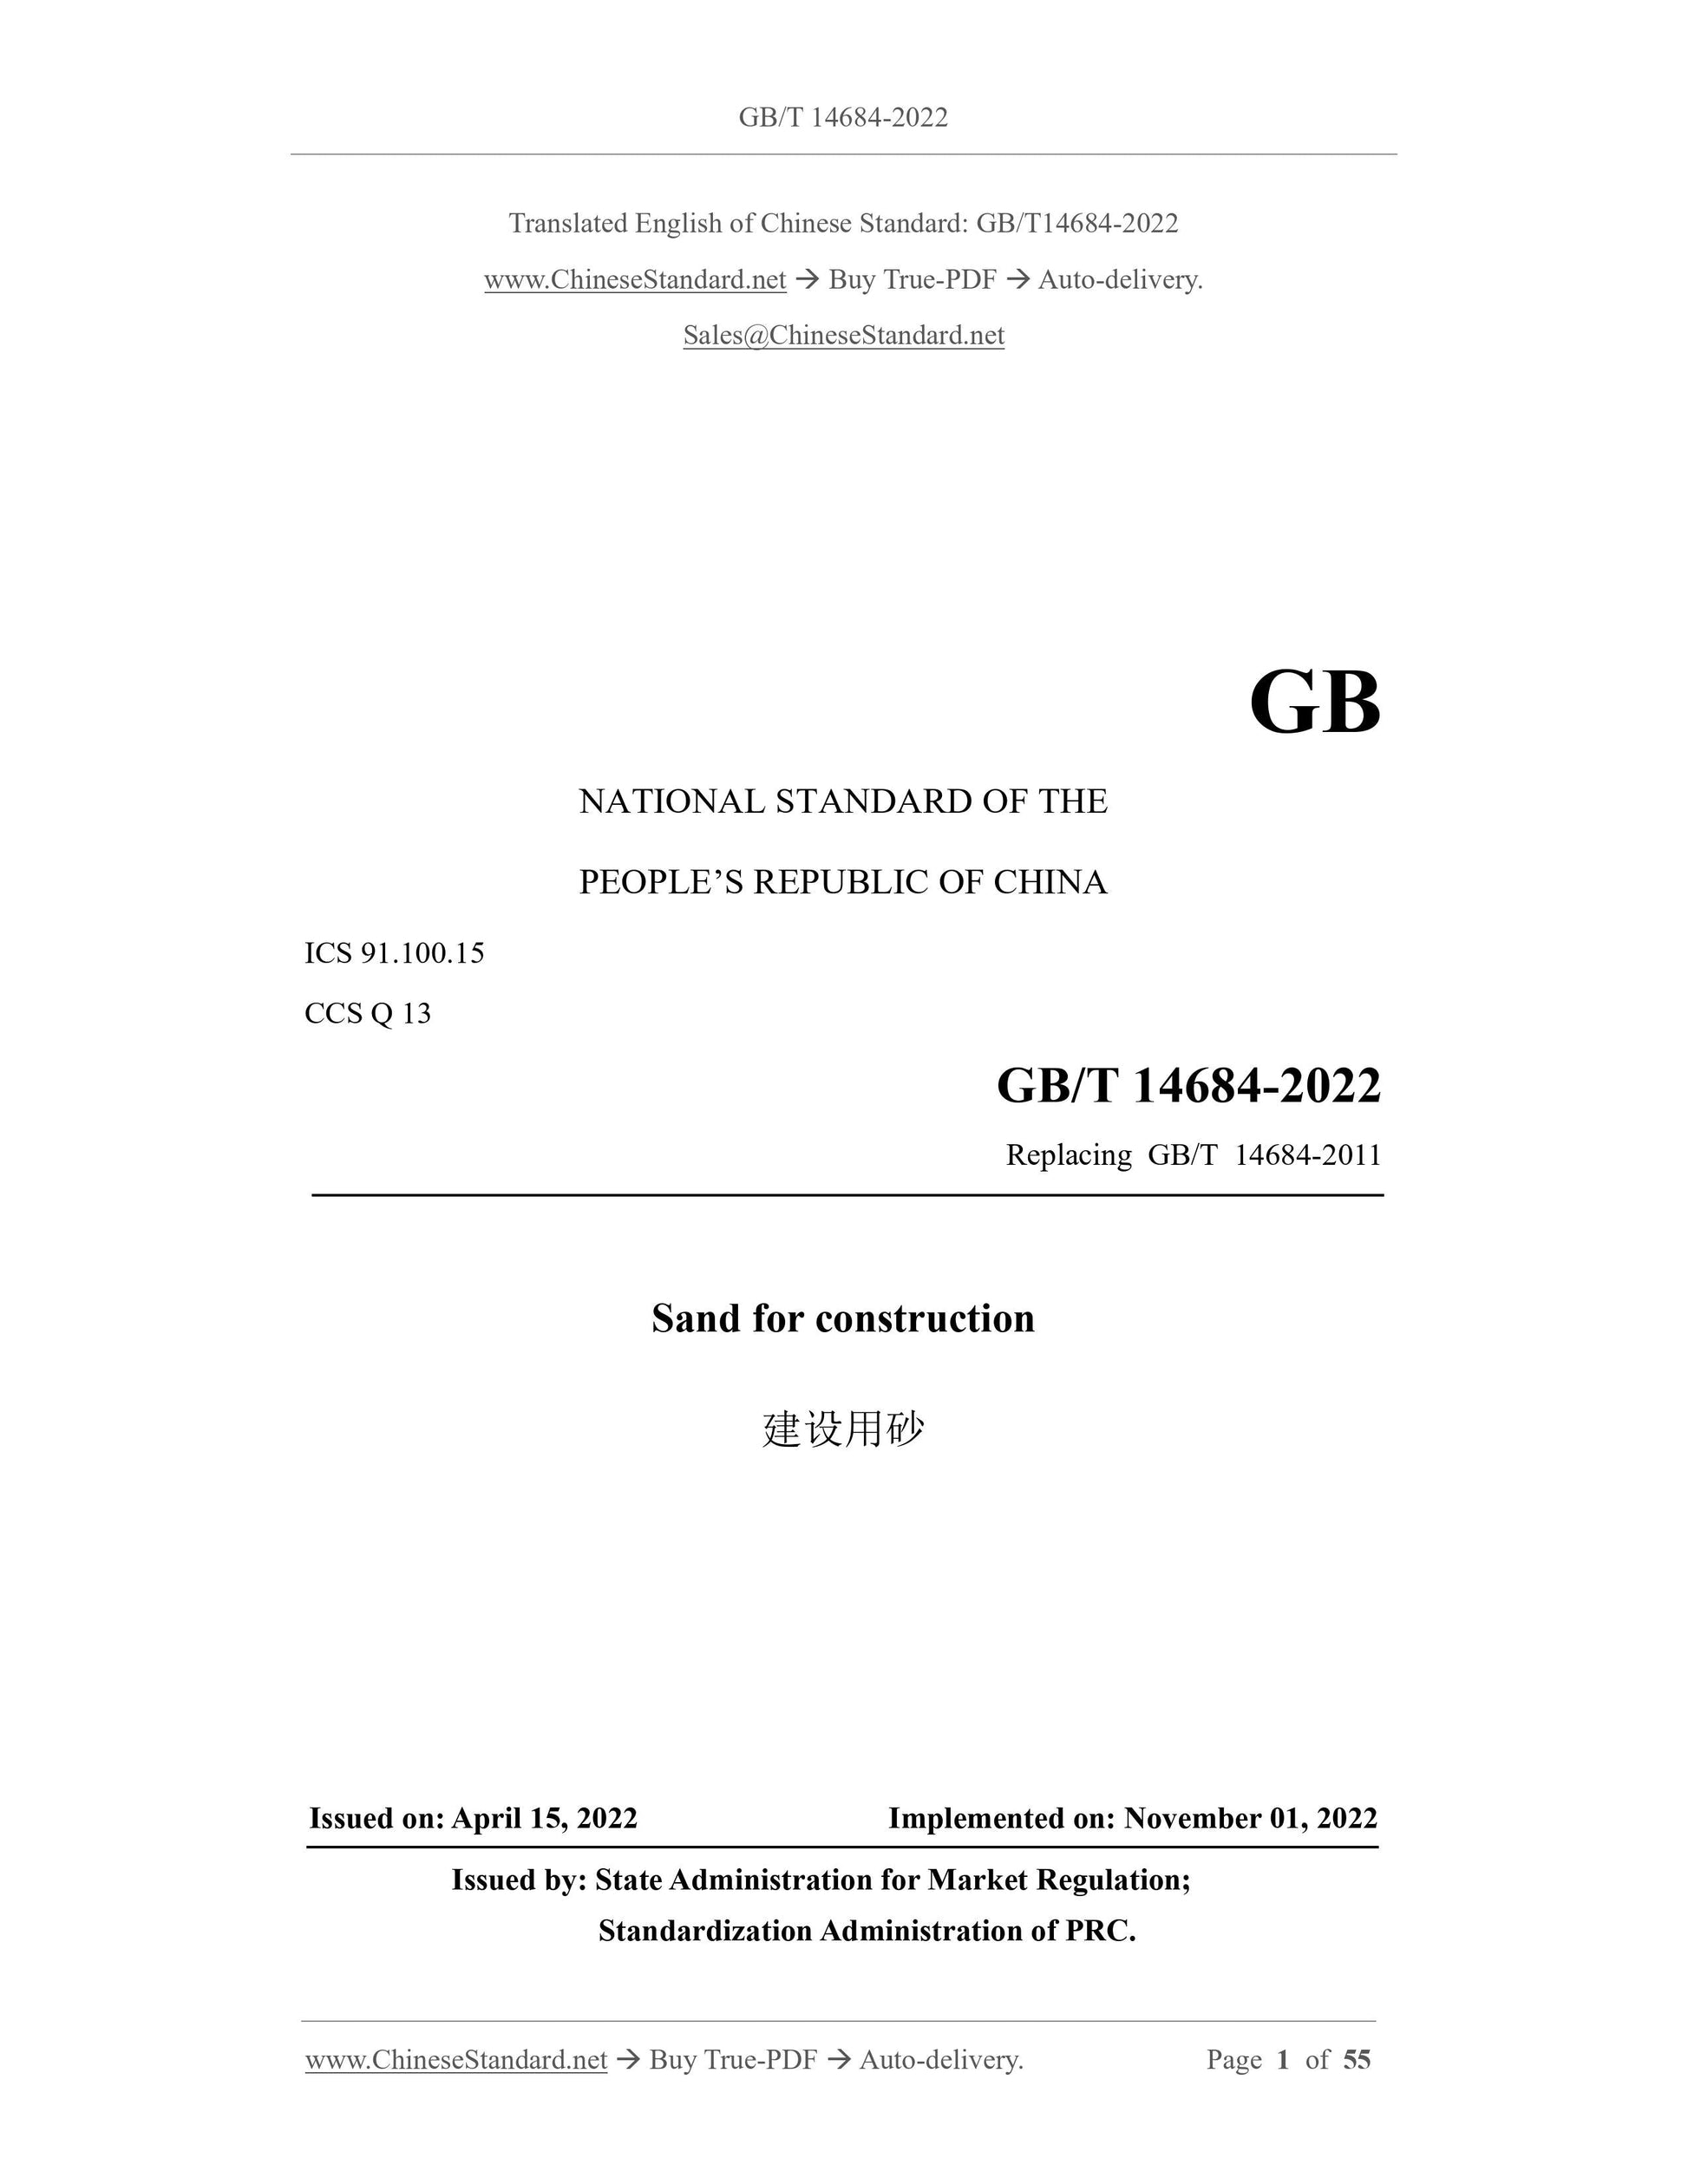 GB/T 14684-2022 Page 1